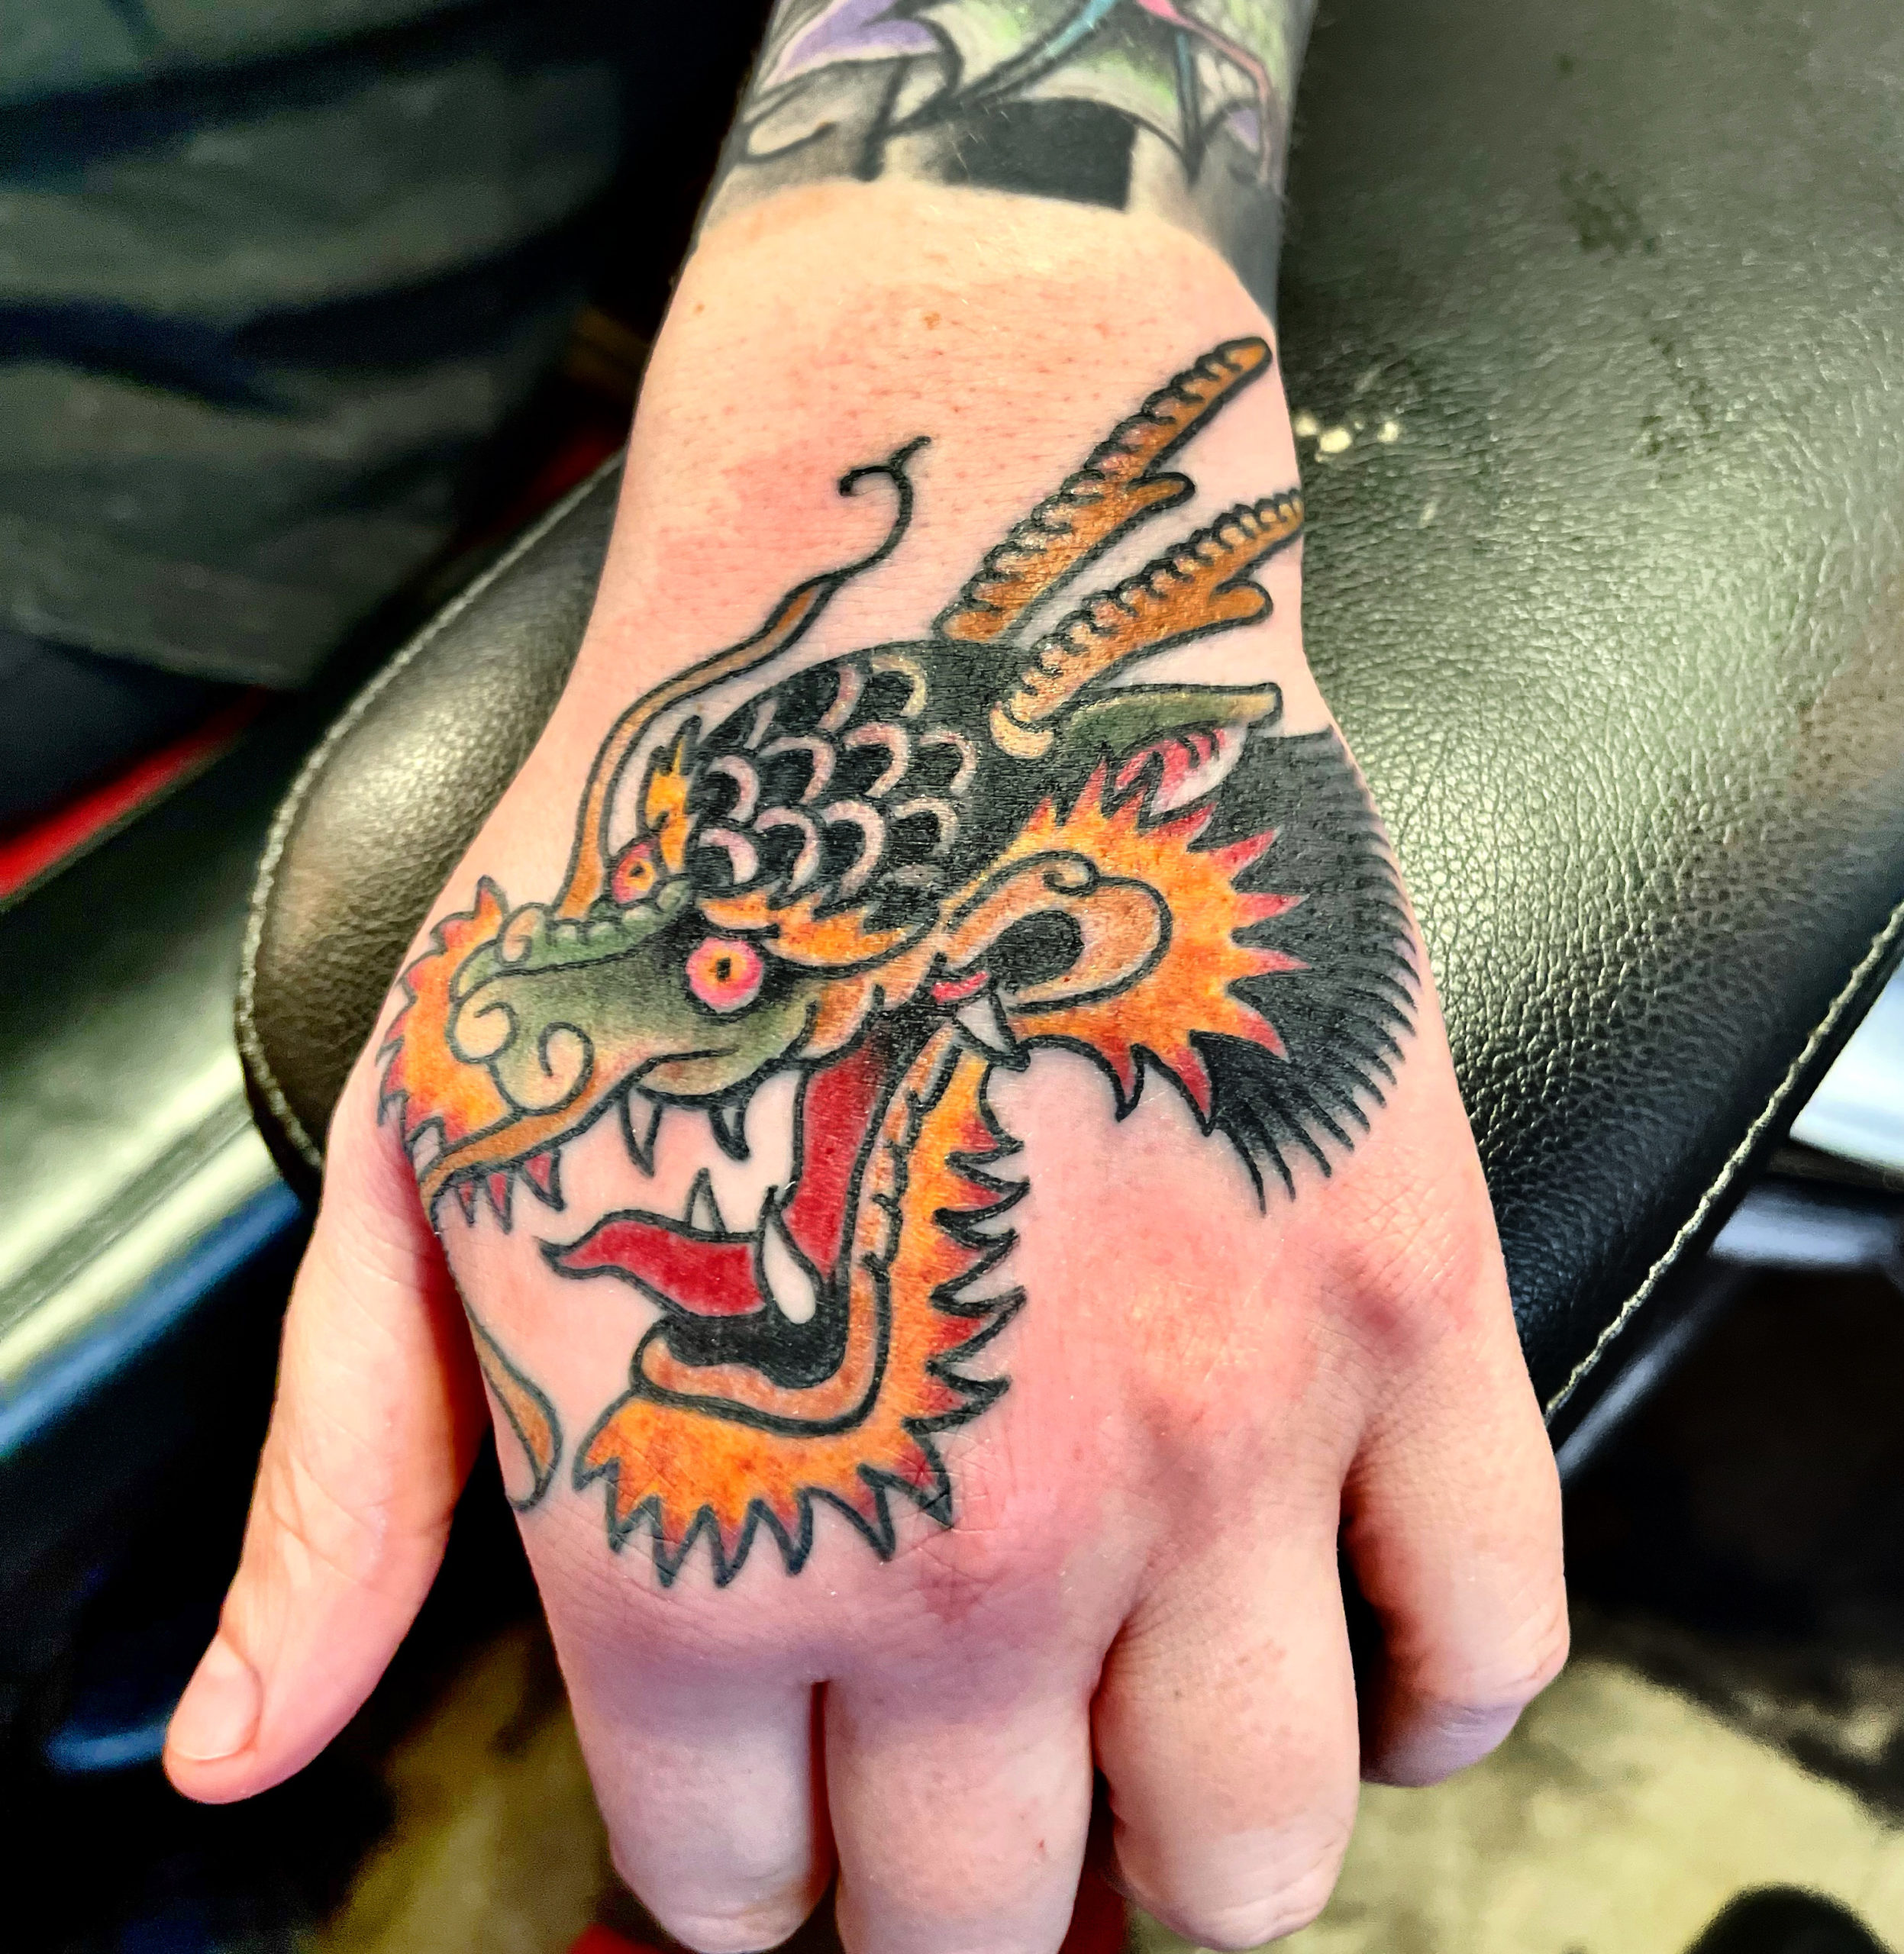 Dragon tattoo on a hand from top tattoo artists in dallas